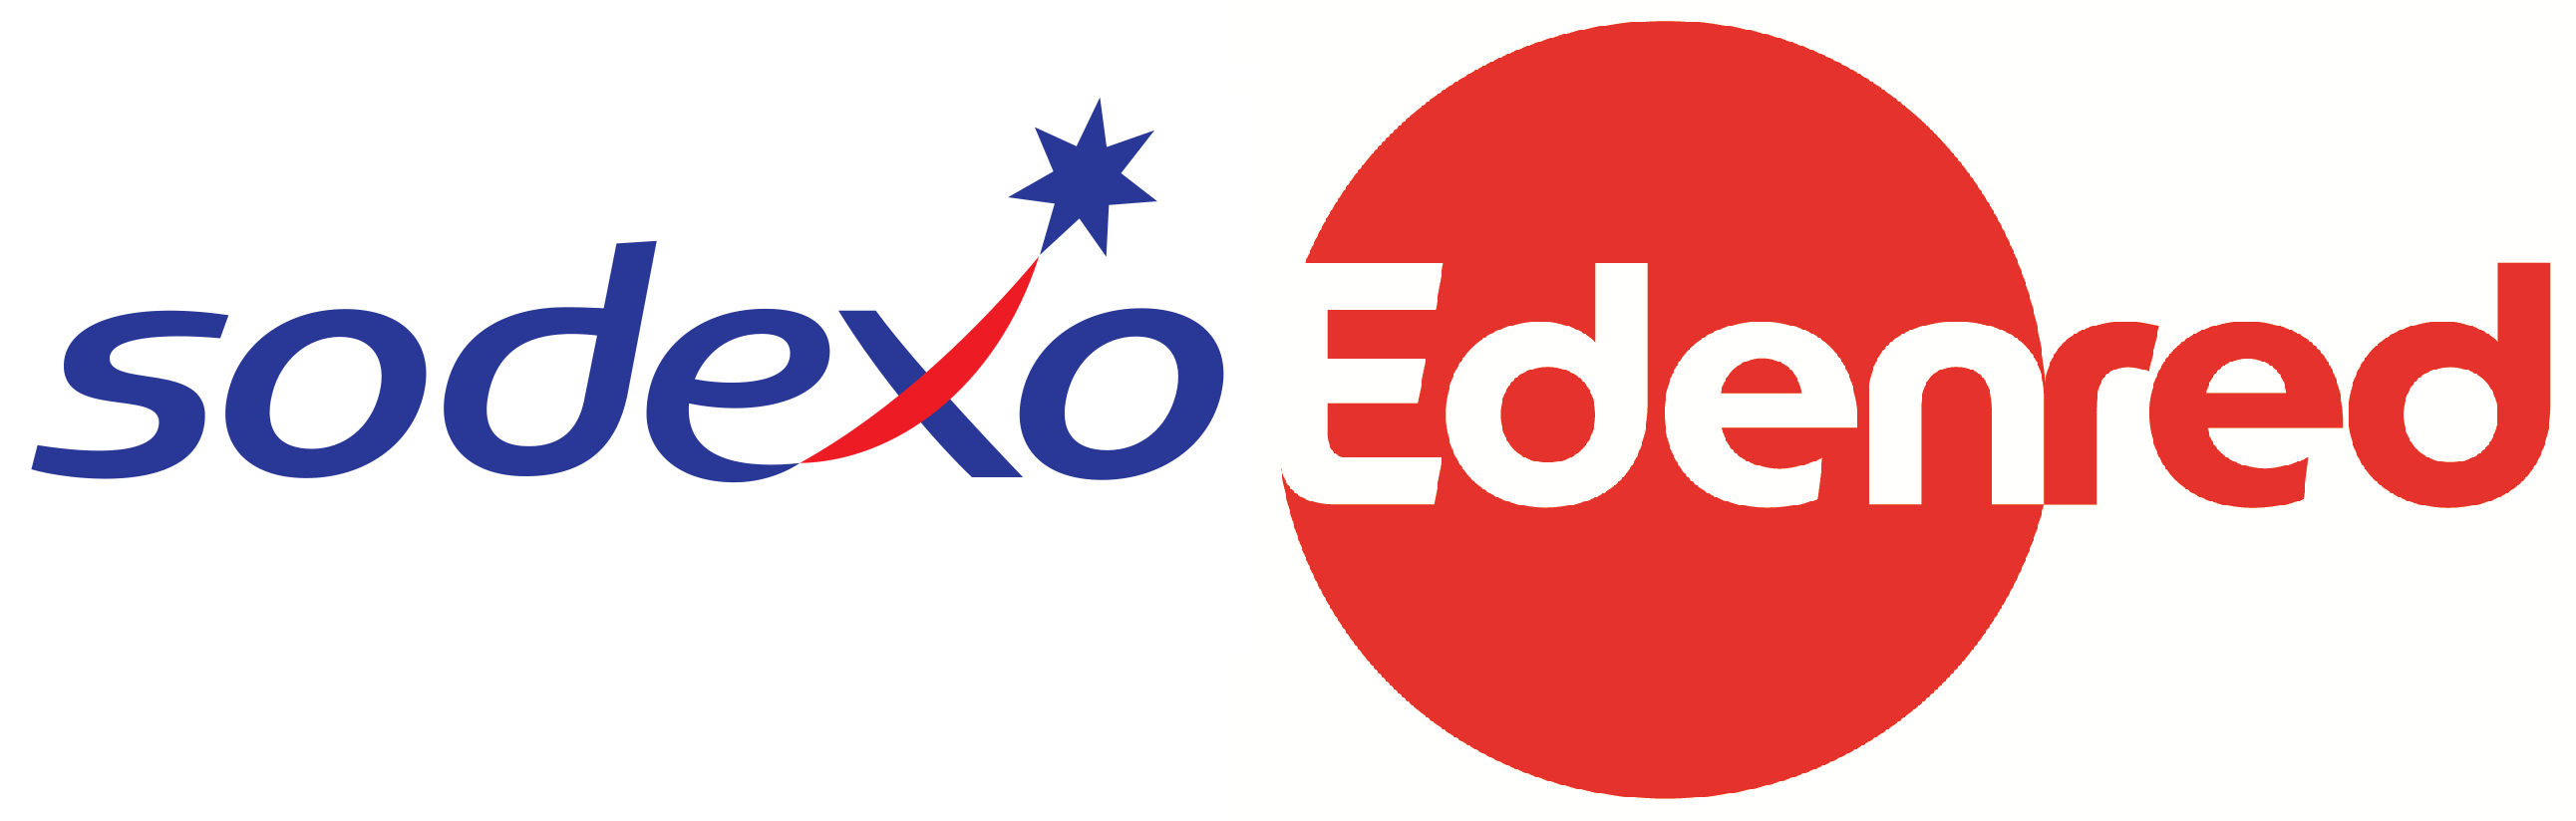 1200px-Sodexo.svg.png